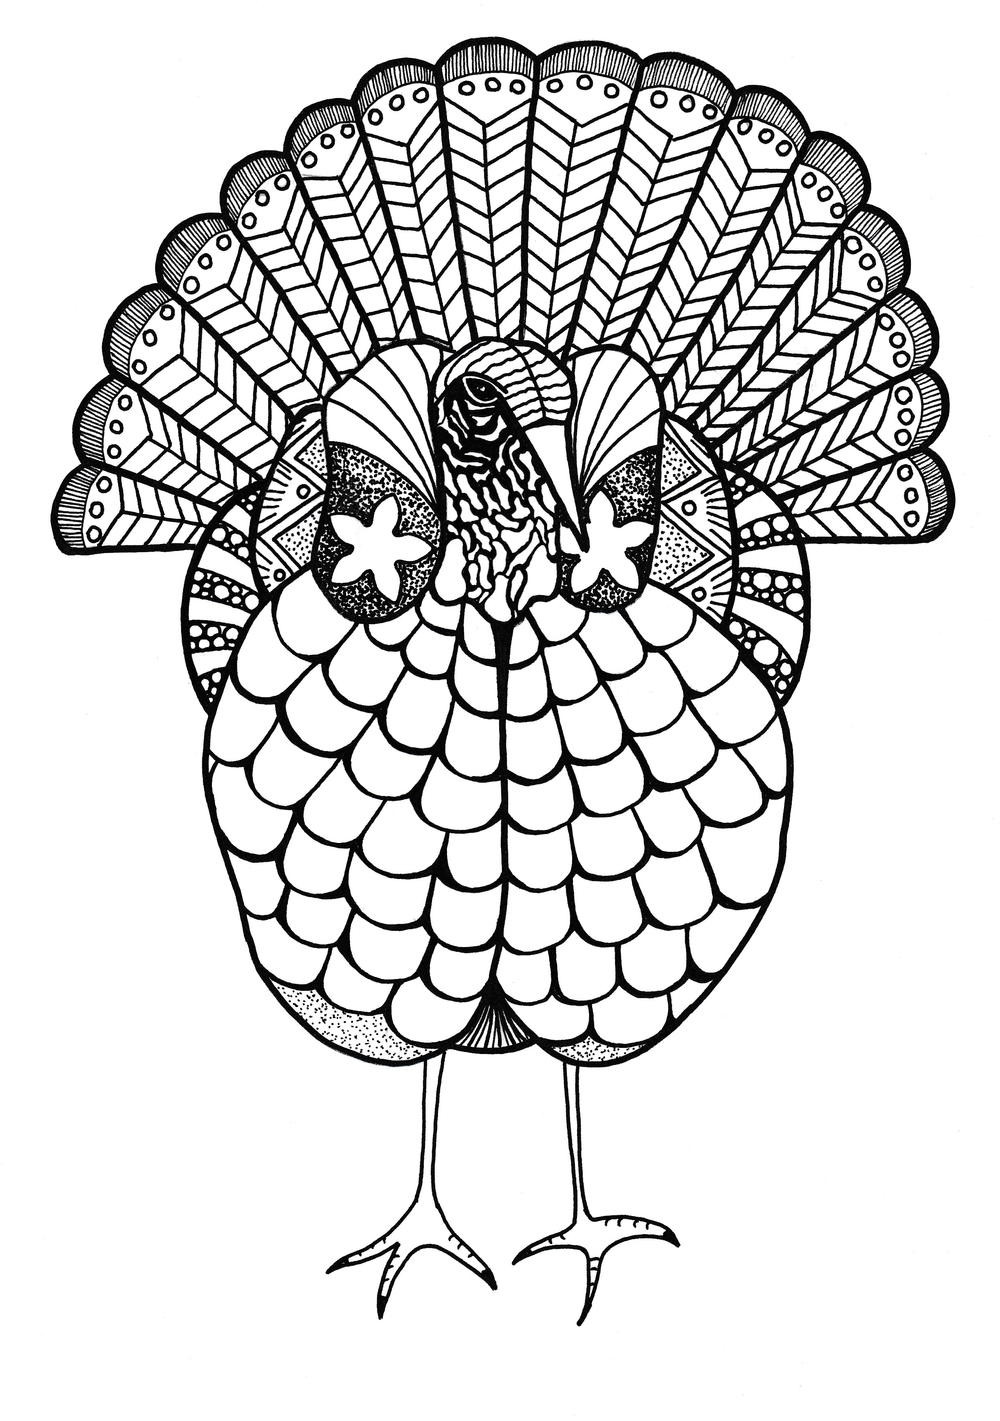 Adult Coloring Book Pictures
 Colorful Turkey Adult Coloring Page